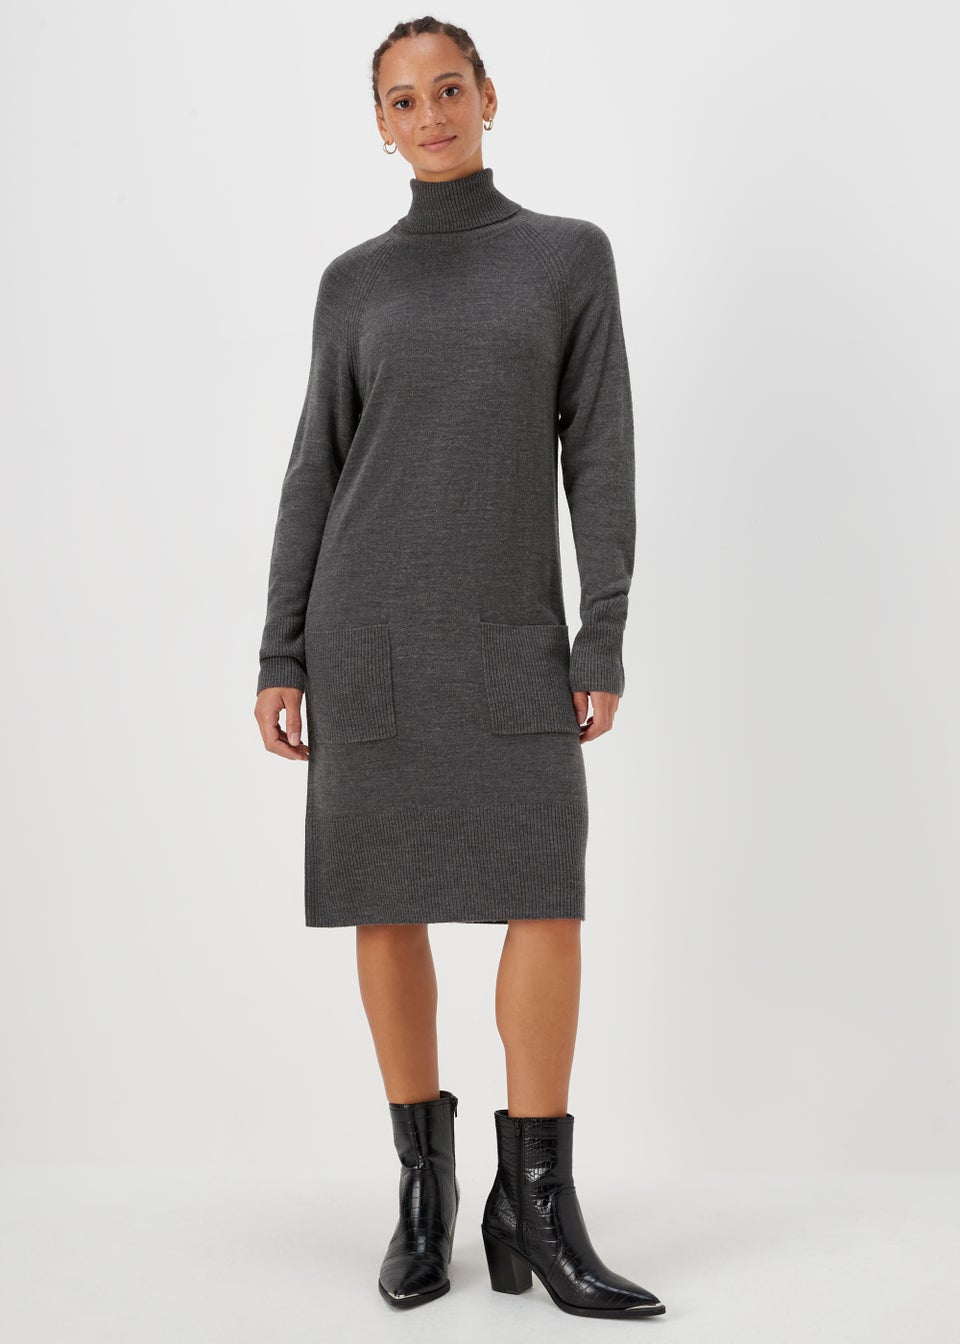 Charcoal Super Soft Roll Neck Knitted Tunic Dress